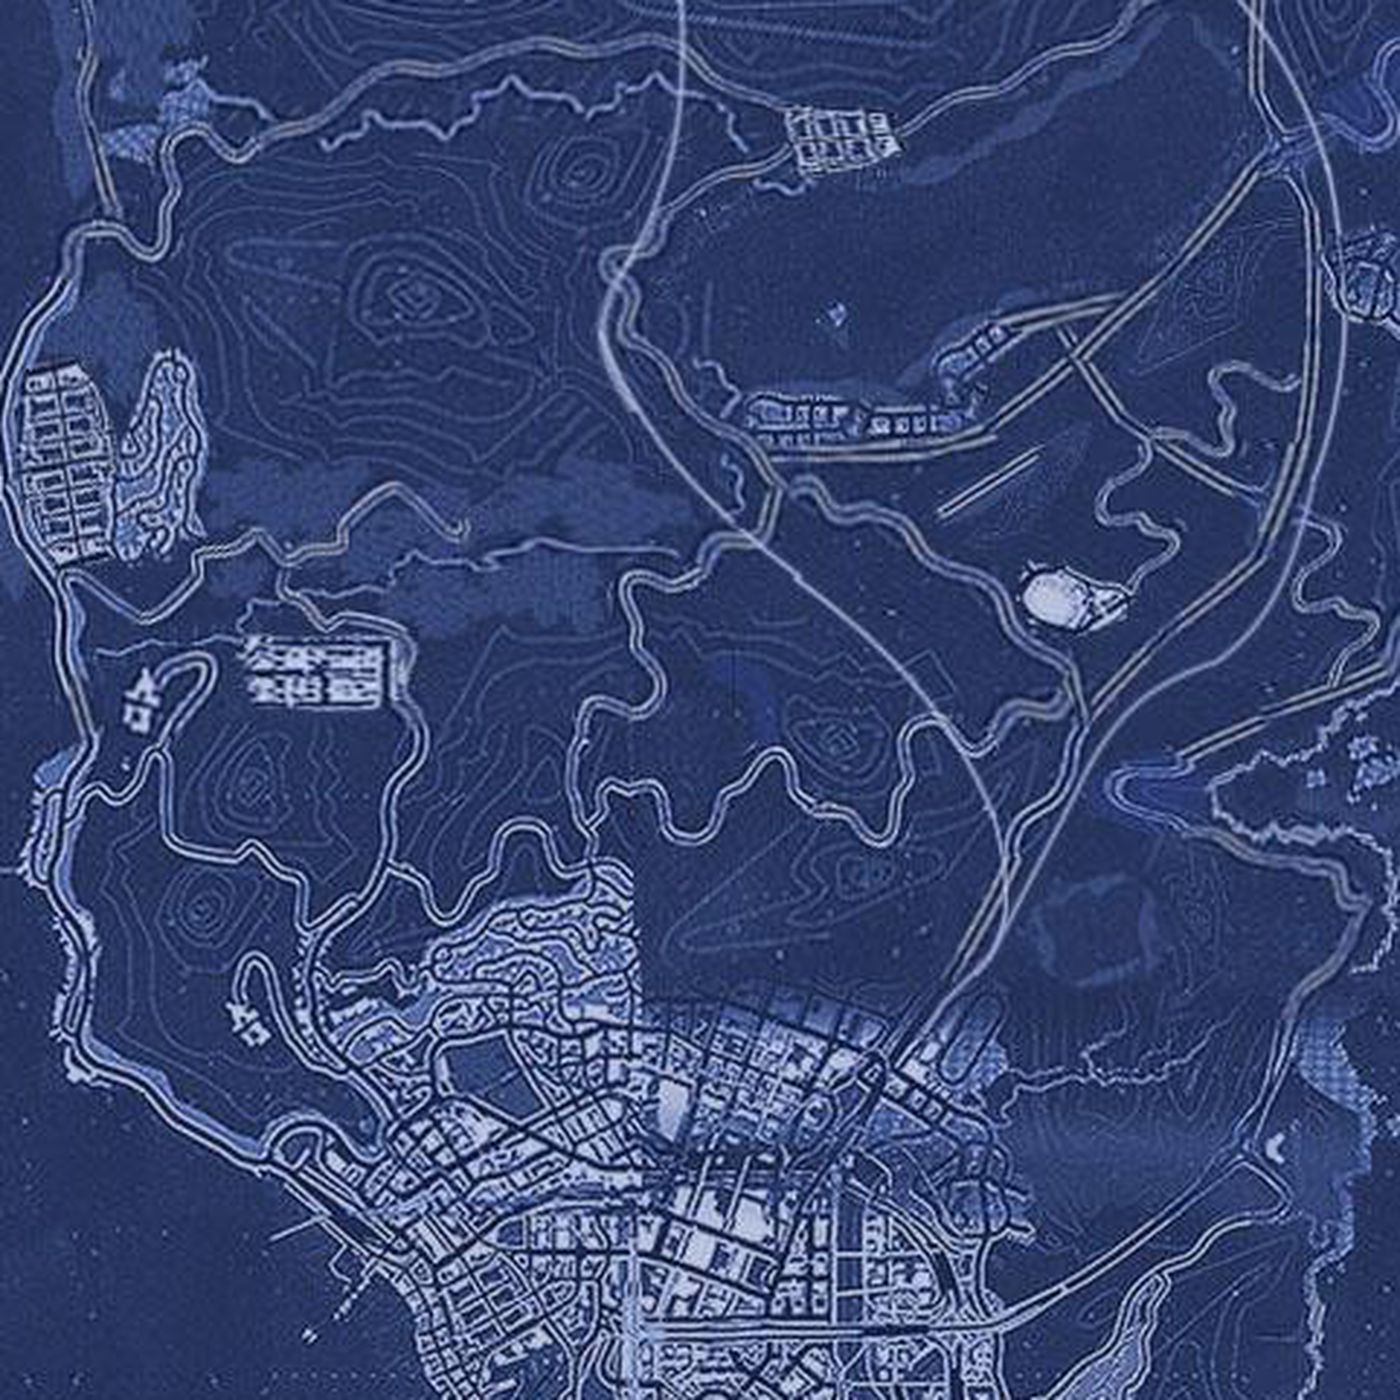 GTA 5 map pieced together